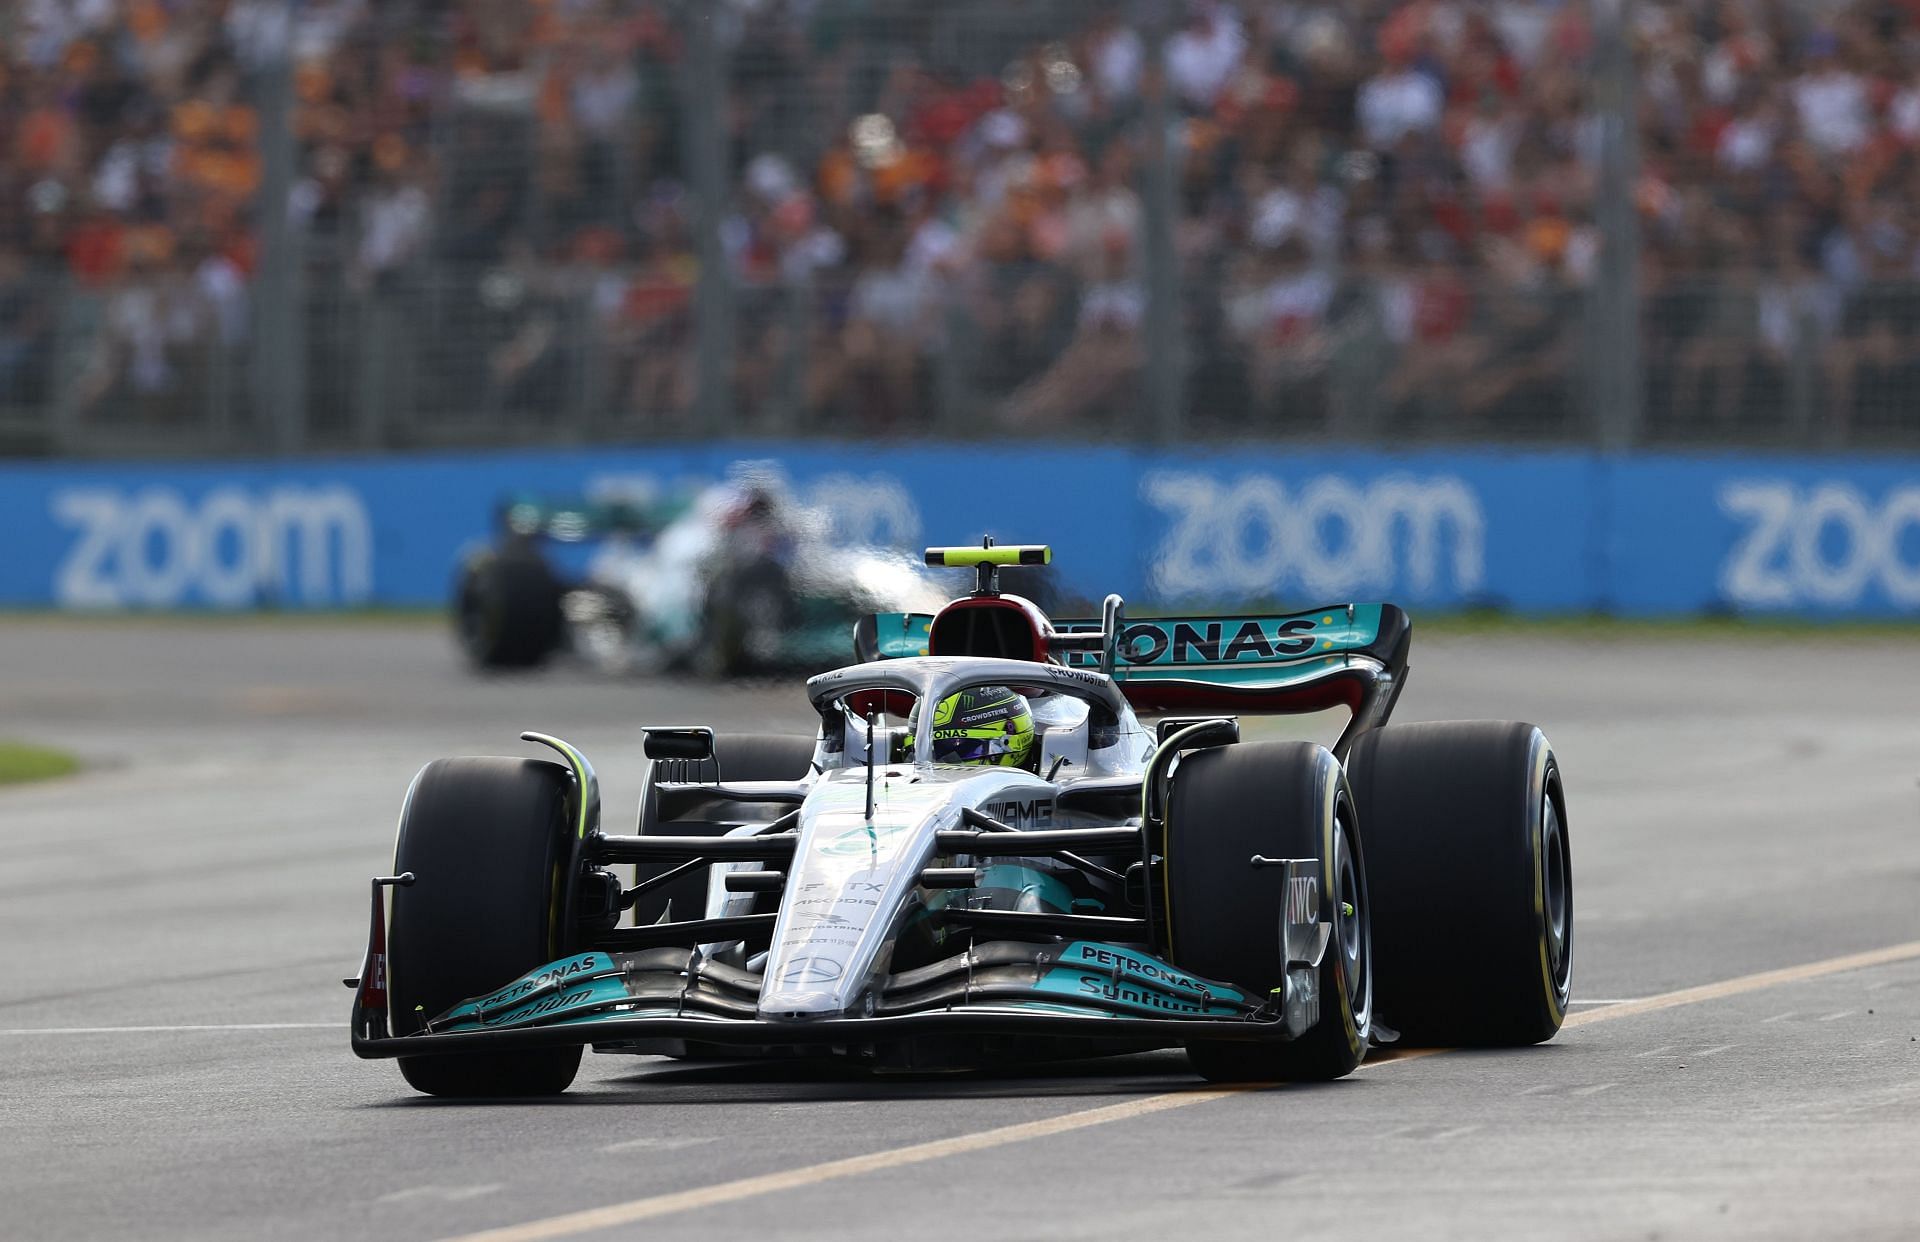 Lewis Hamilton trails his teammate in the championship standings after the first three races